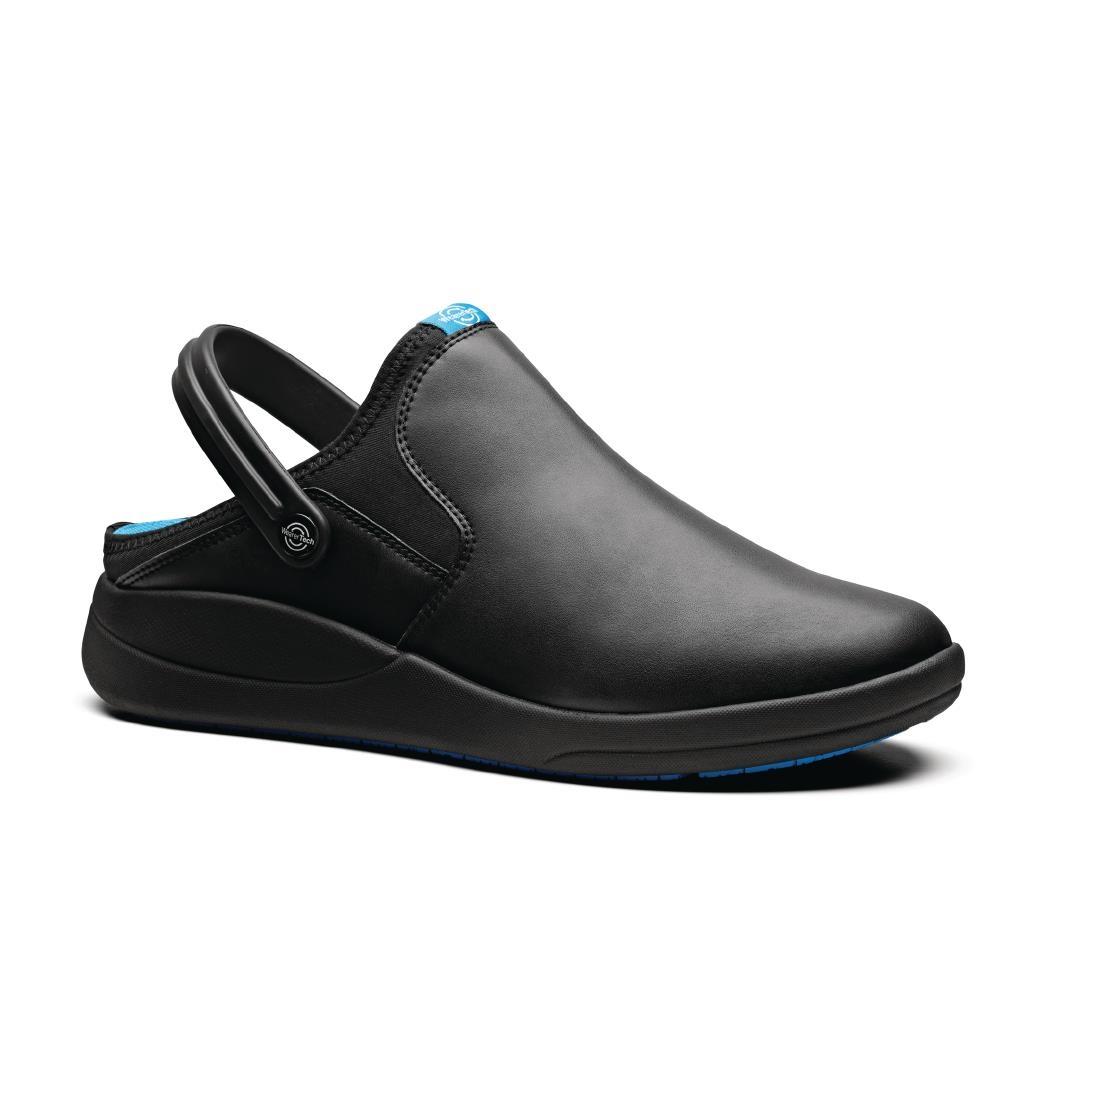 WearerTech Refresh Clog Black with Firm Insoles Size 46 - BB556-11  - 2